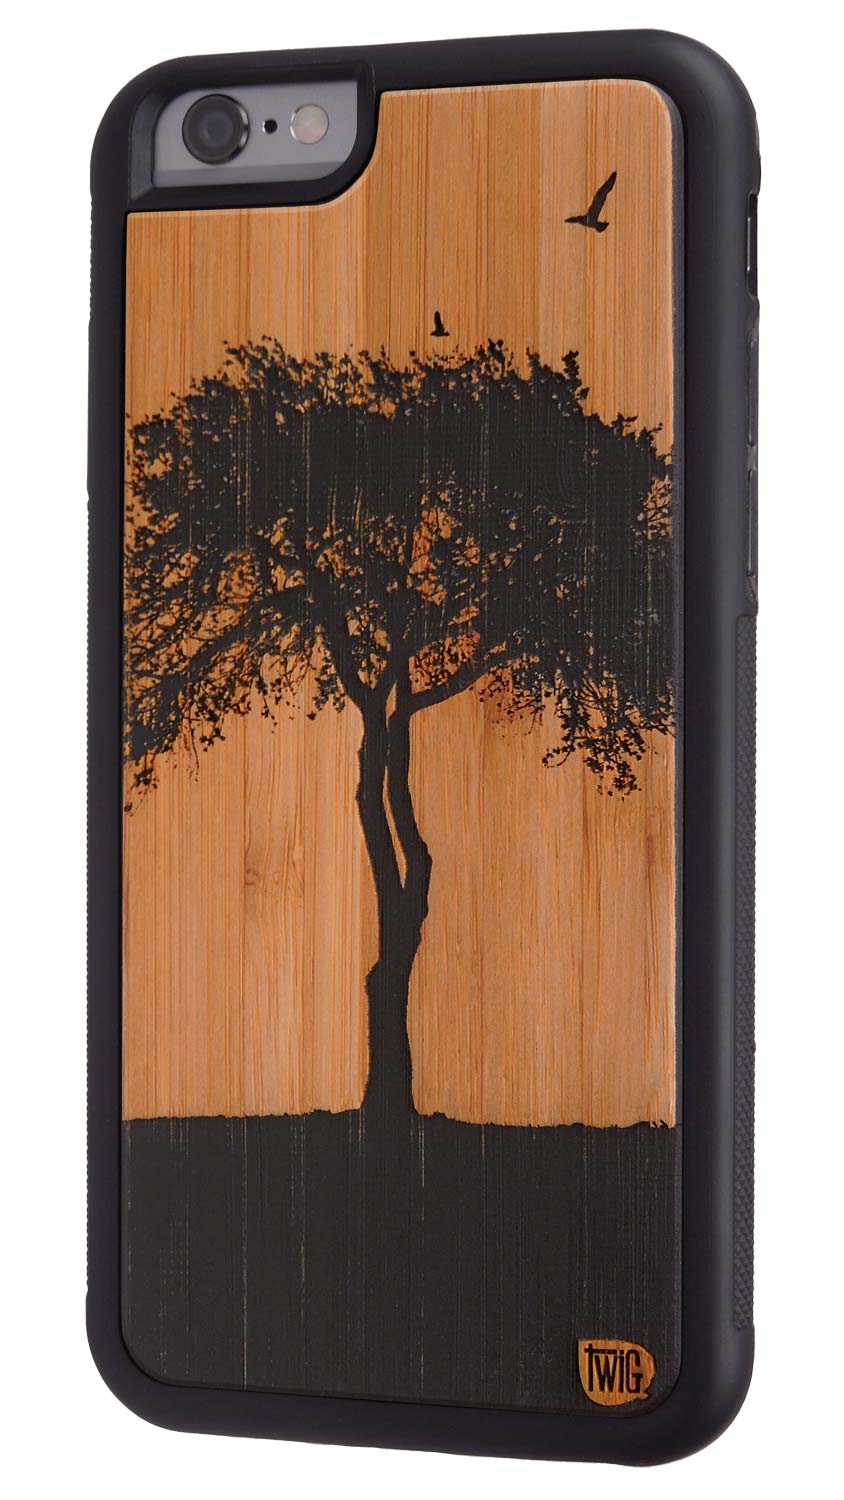 The One Tree - Bamboo iPhone Case, iPhone Case - Twig Case Co.